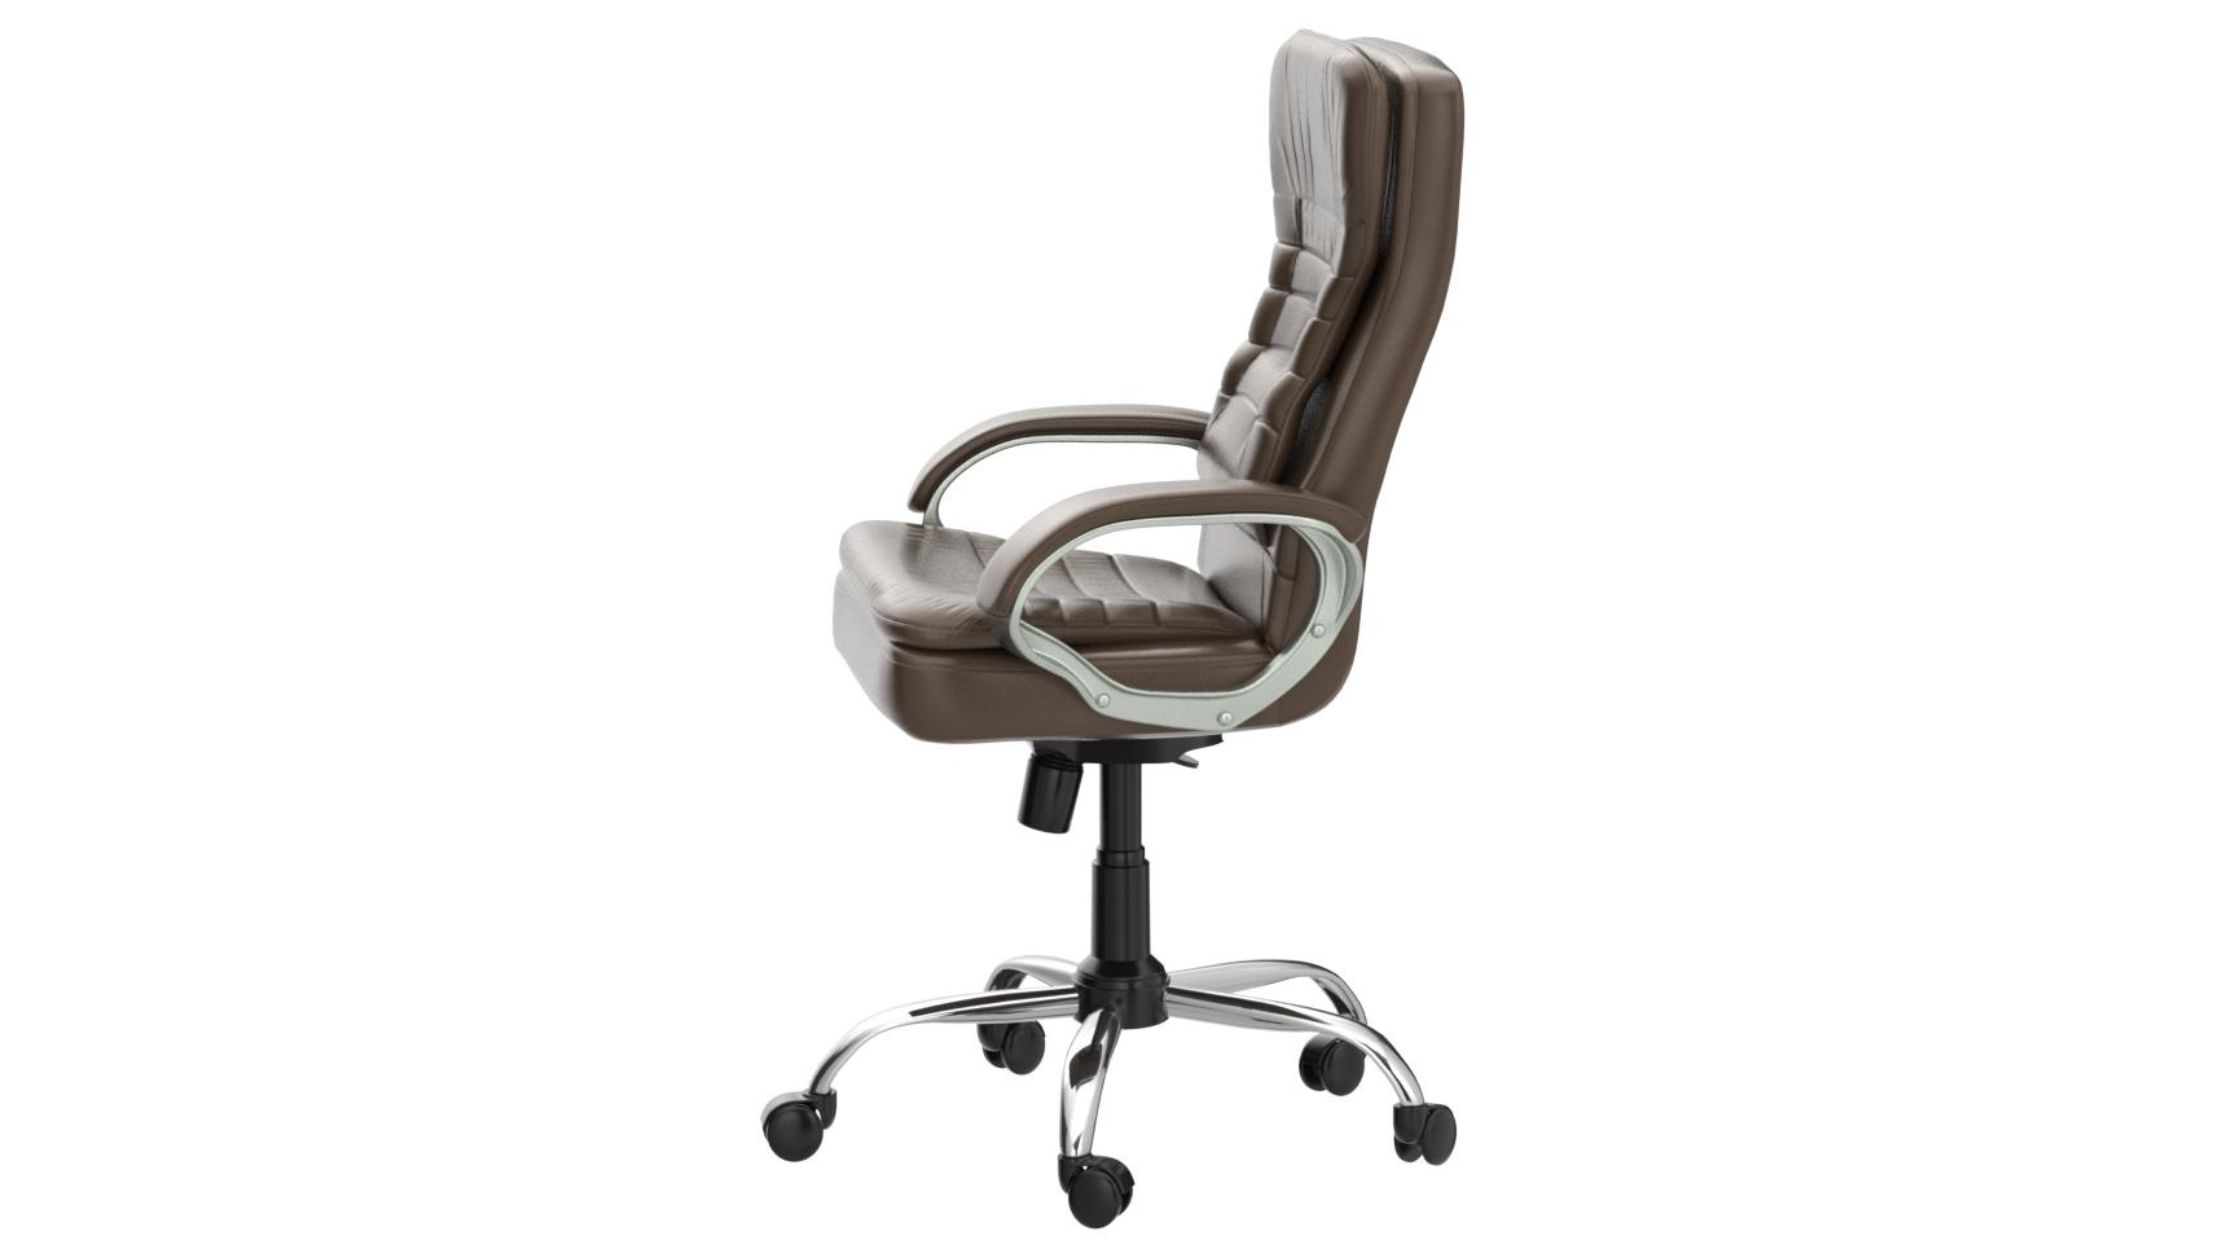 ihms-chair for your health and productivity